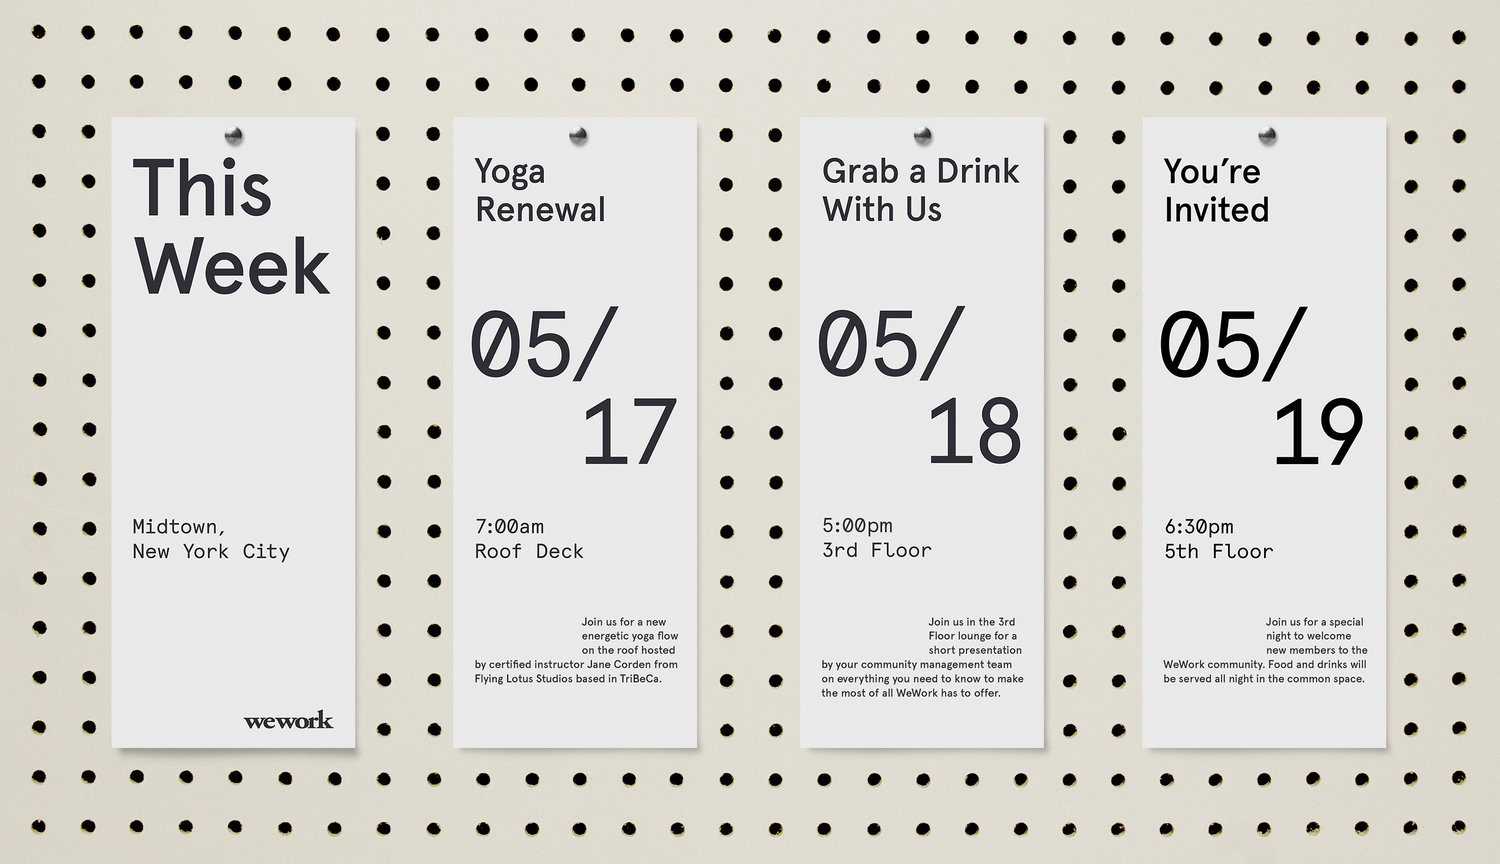 New visual identity designed by Gretel for New York-based co-working business WeWork